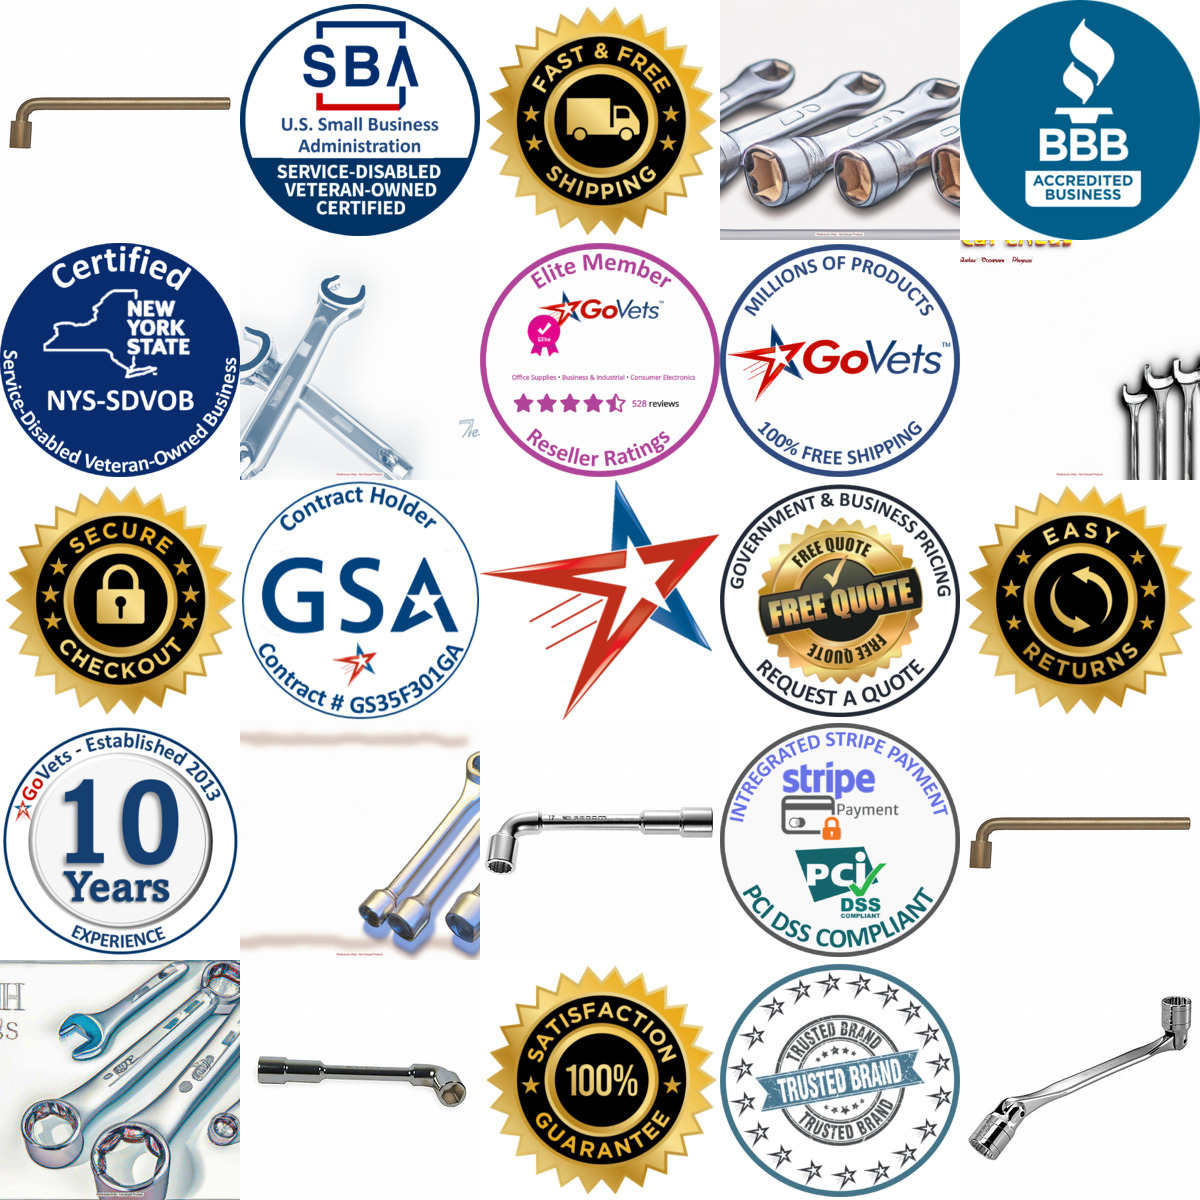 A selection of Socket End Wrenches products on GoVets